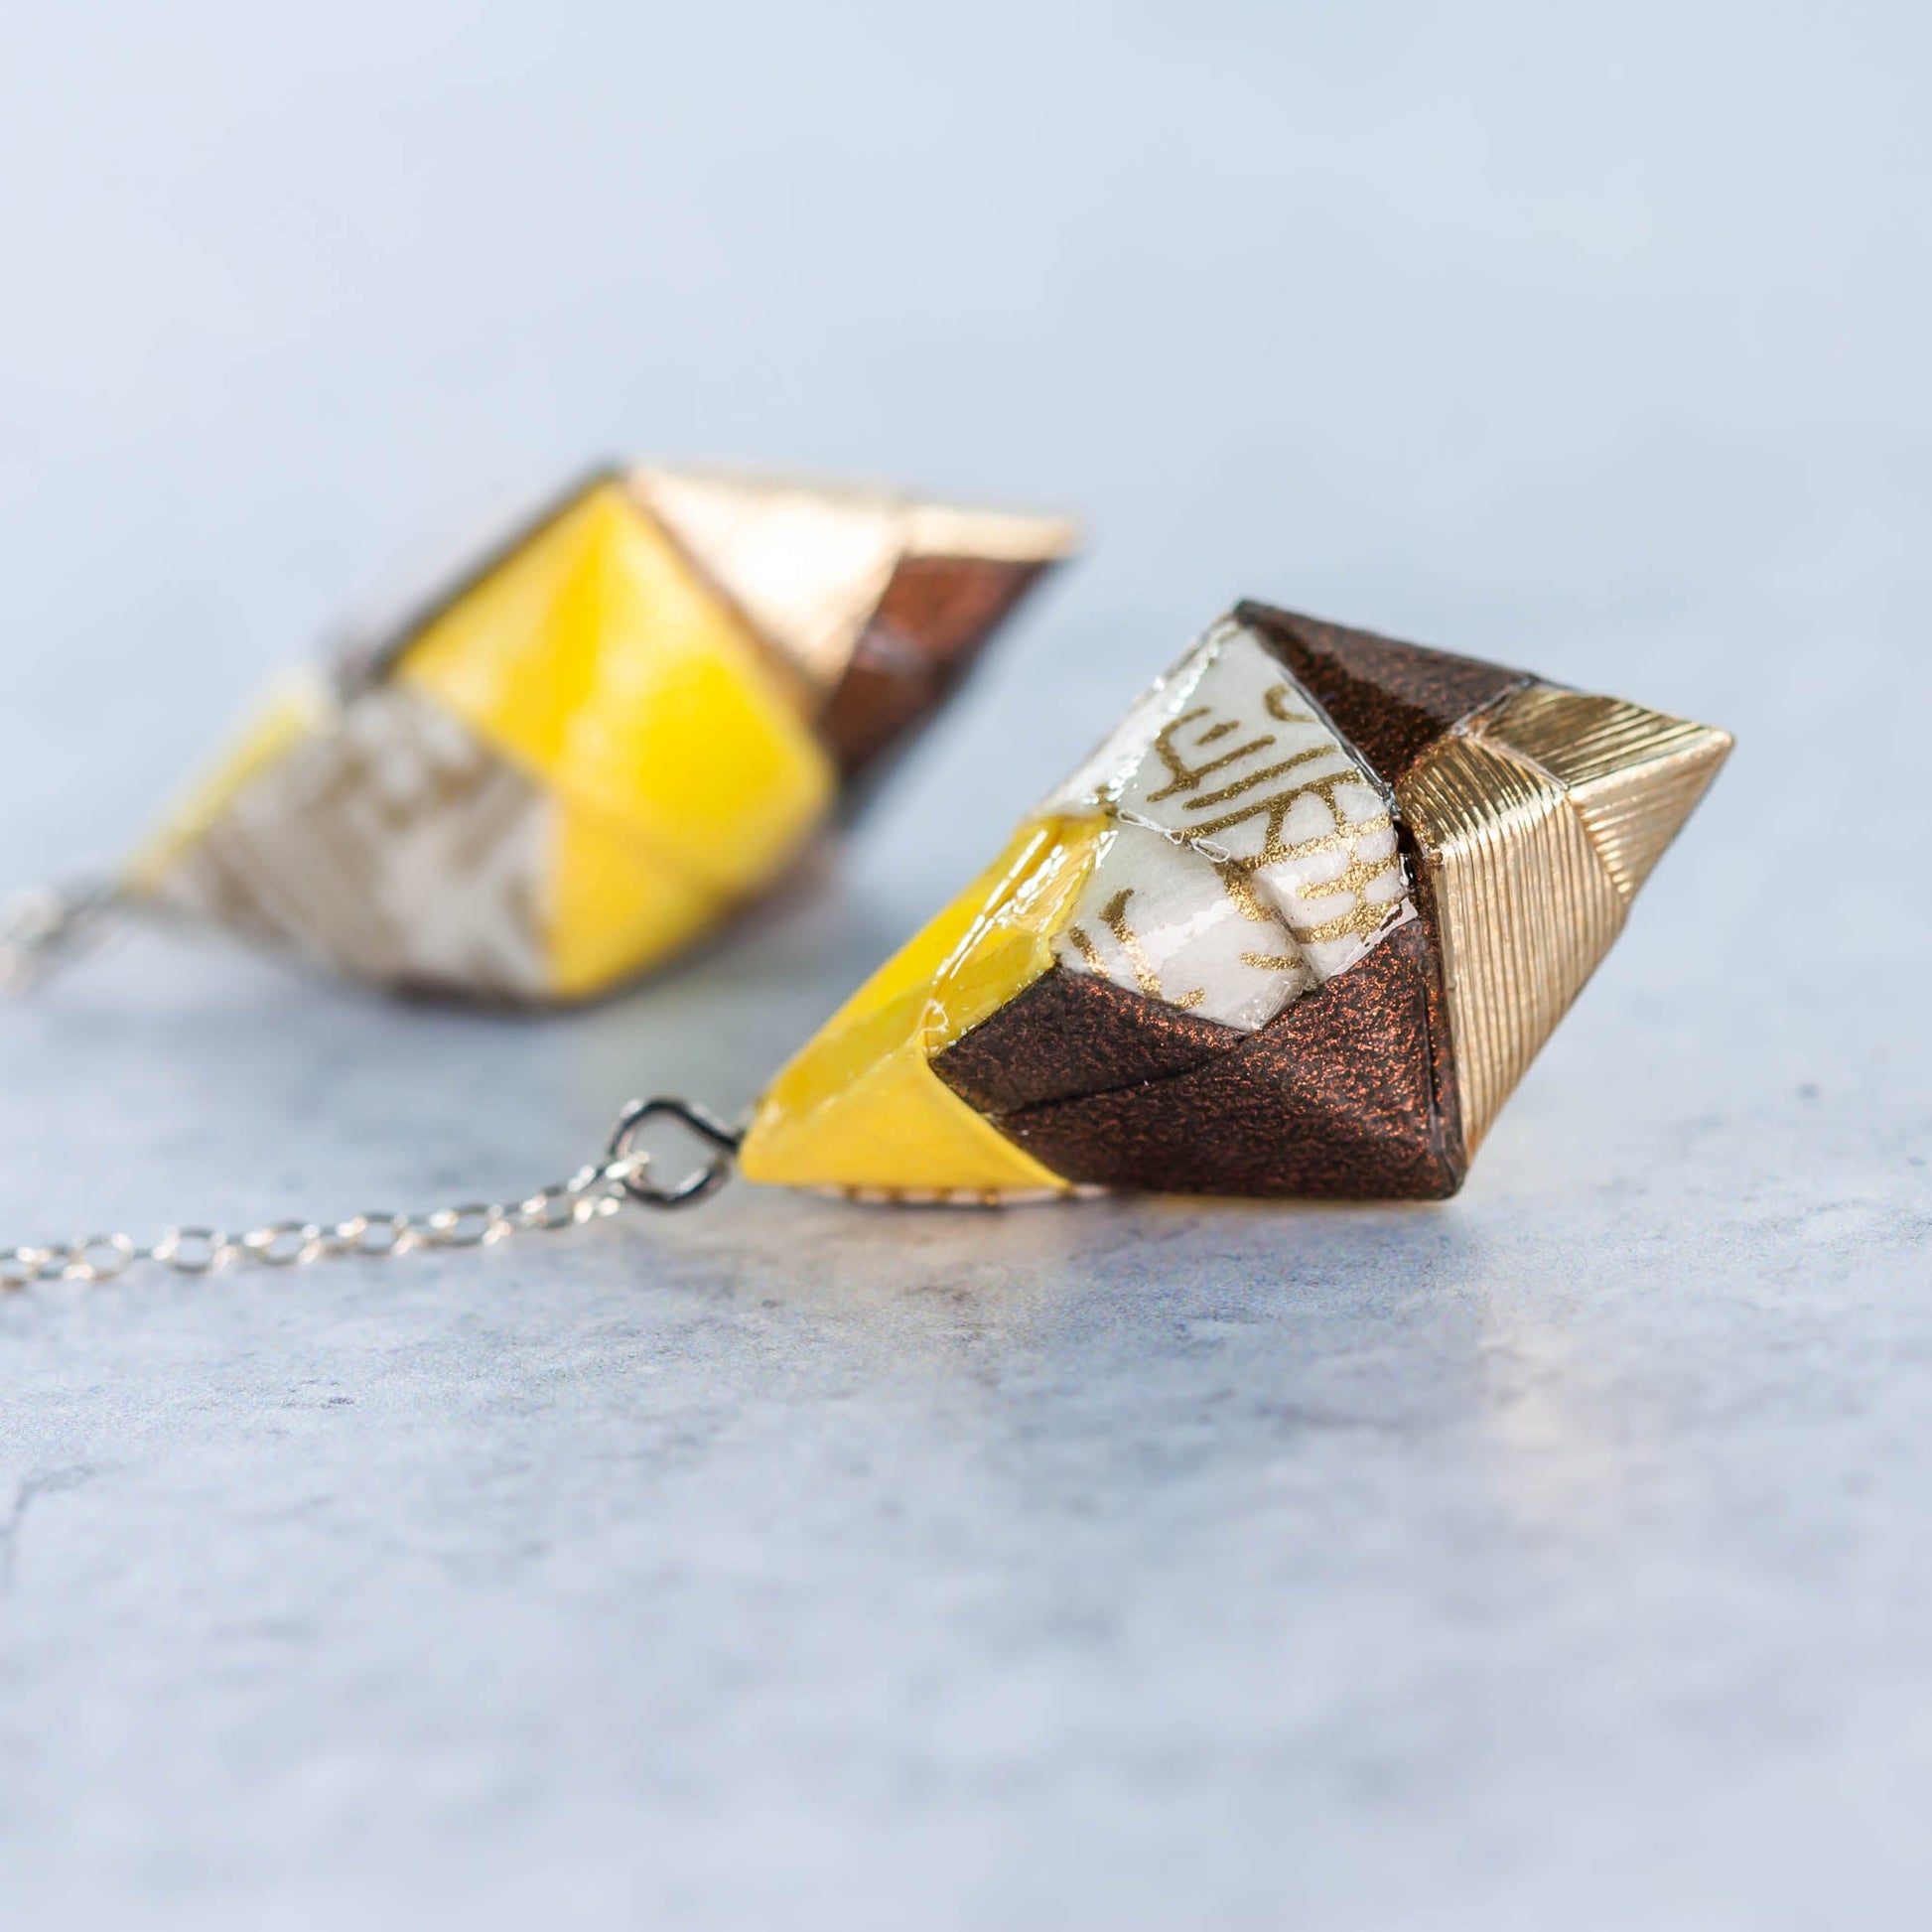 Origami Diamond Paper Earrings - Yellow & Gold - By LeeMo Designs in Bend, Oregon